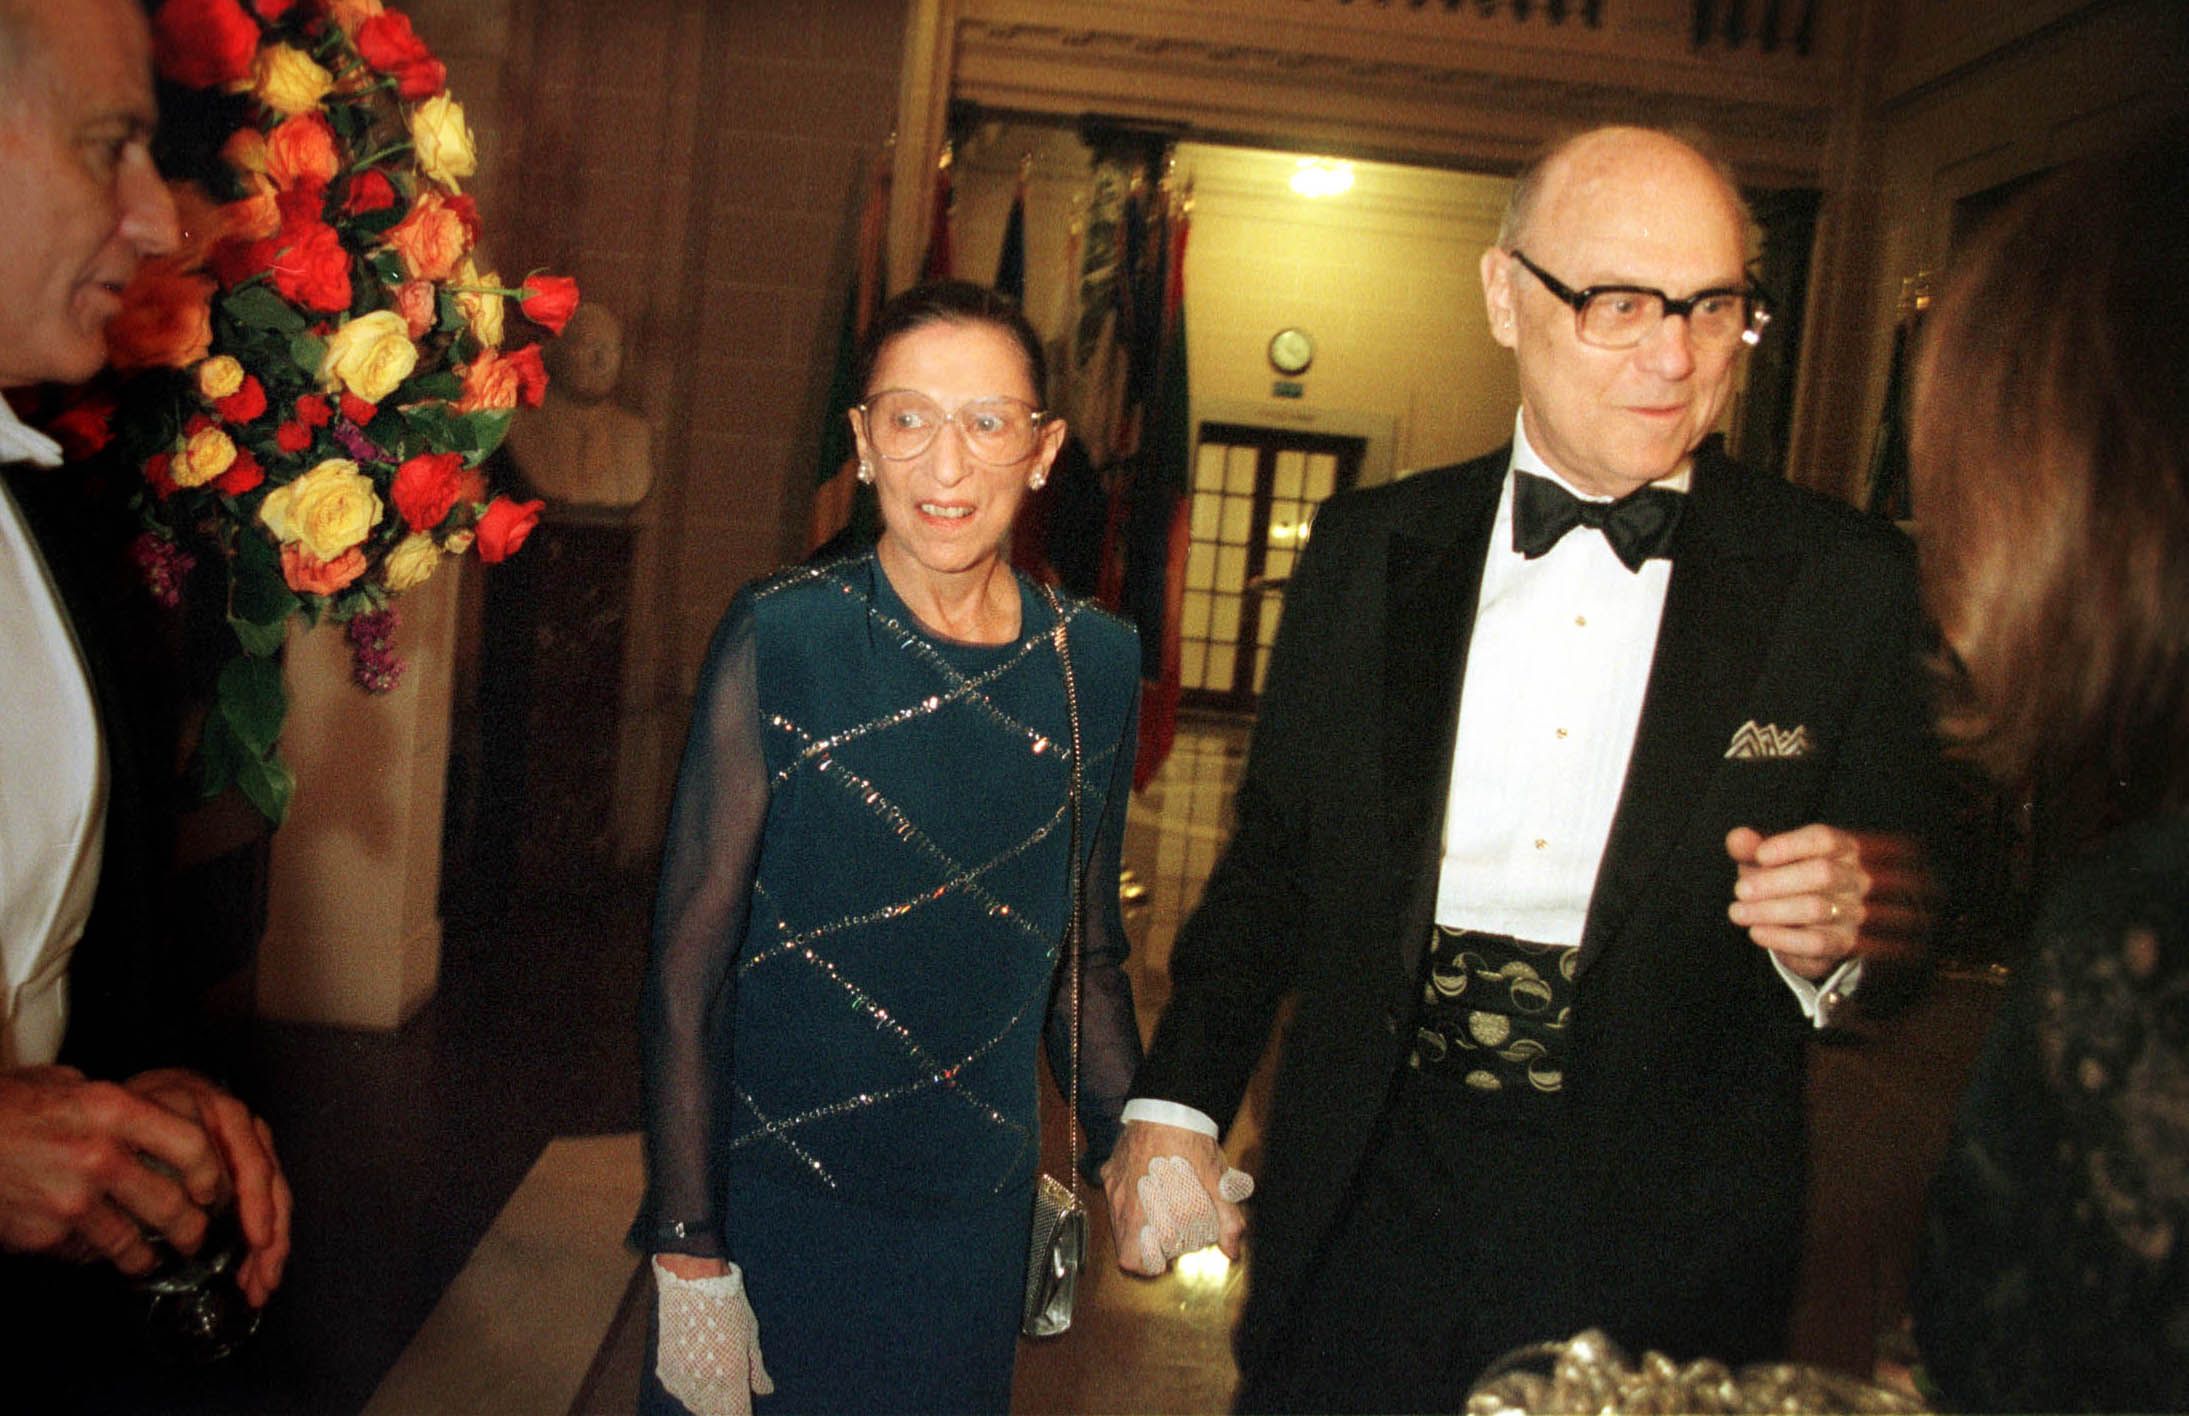 RBG and her husband, John Ginsburg, attend a gala dinner in 2000. Photo: Karin Cooper/Liaison